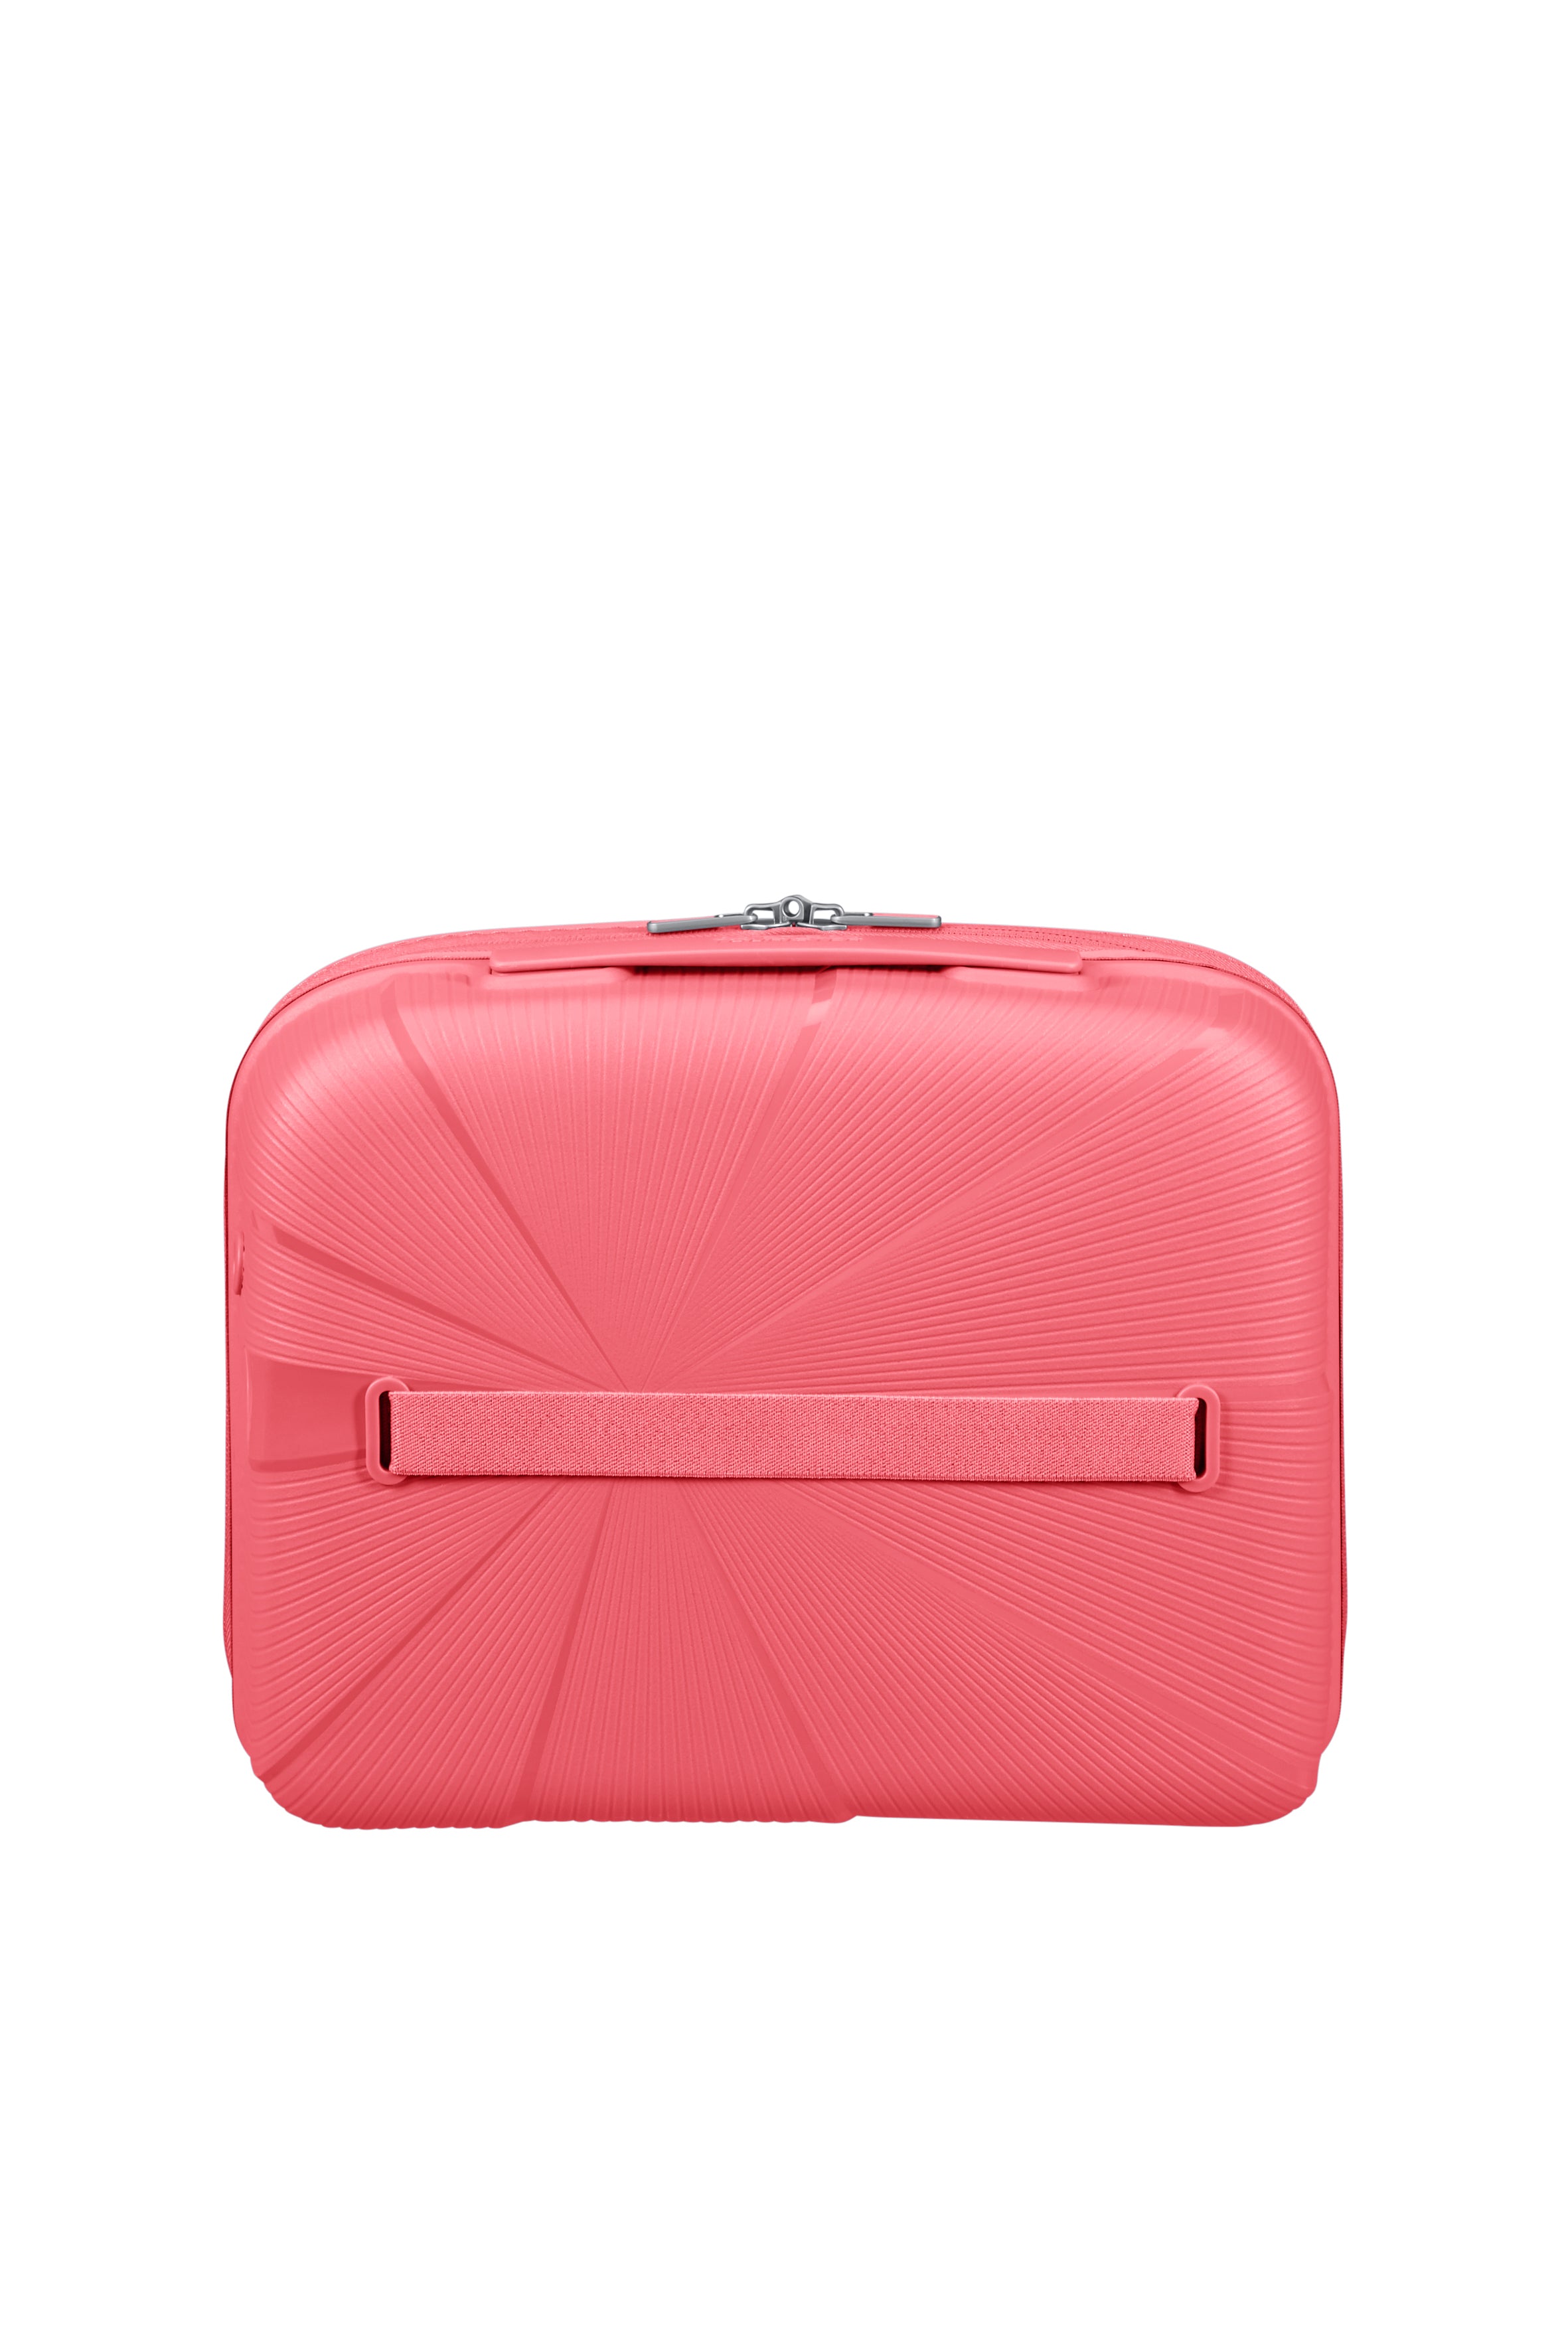 American Tourister - Star Vibe Beauty Case - Sun kissed Coral-4